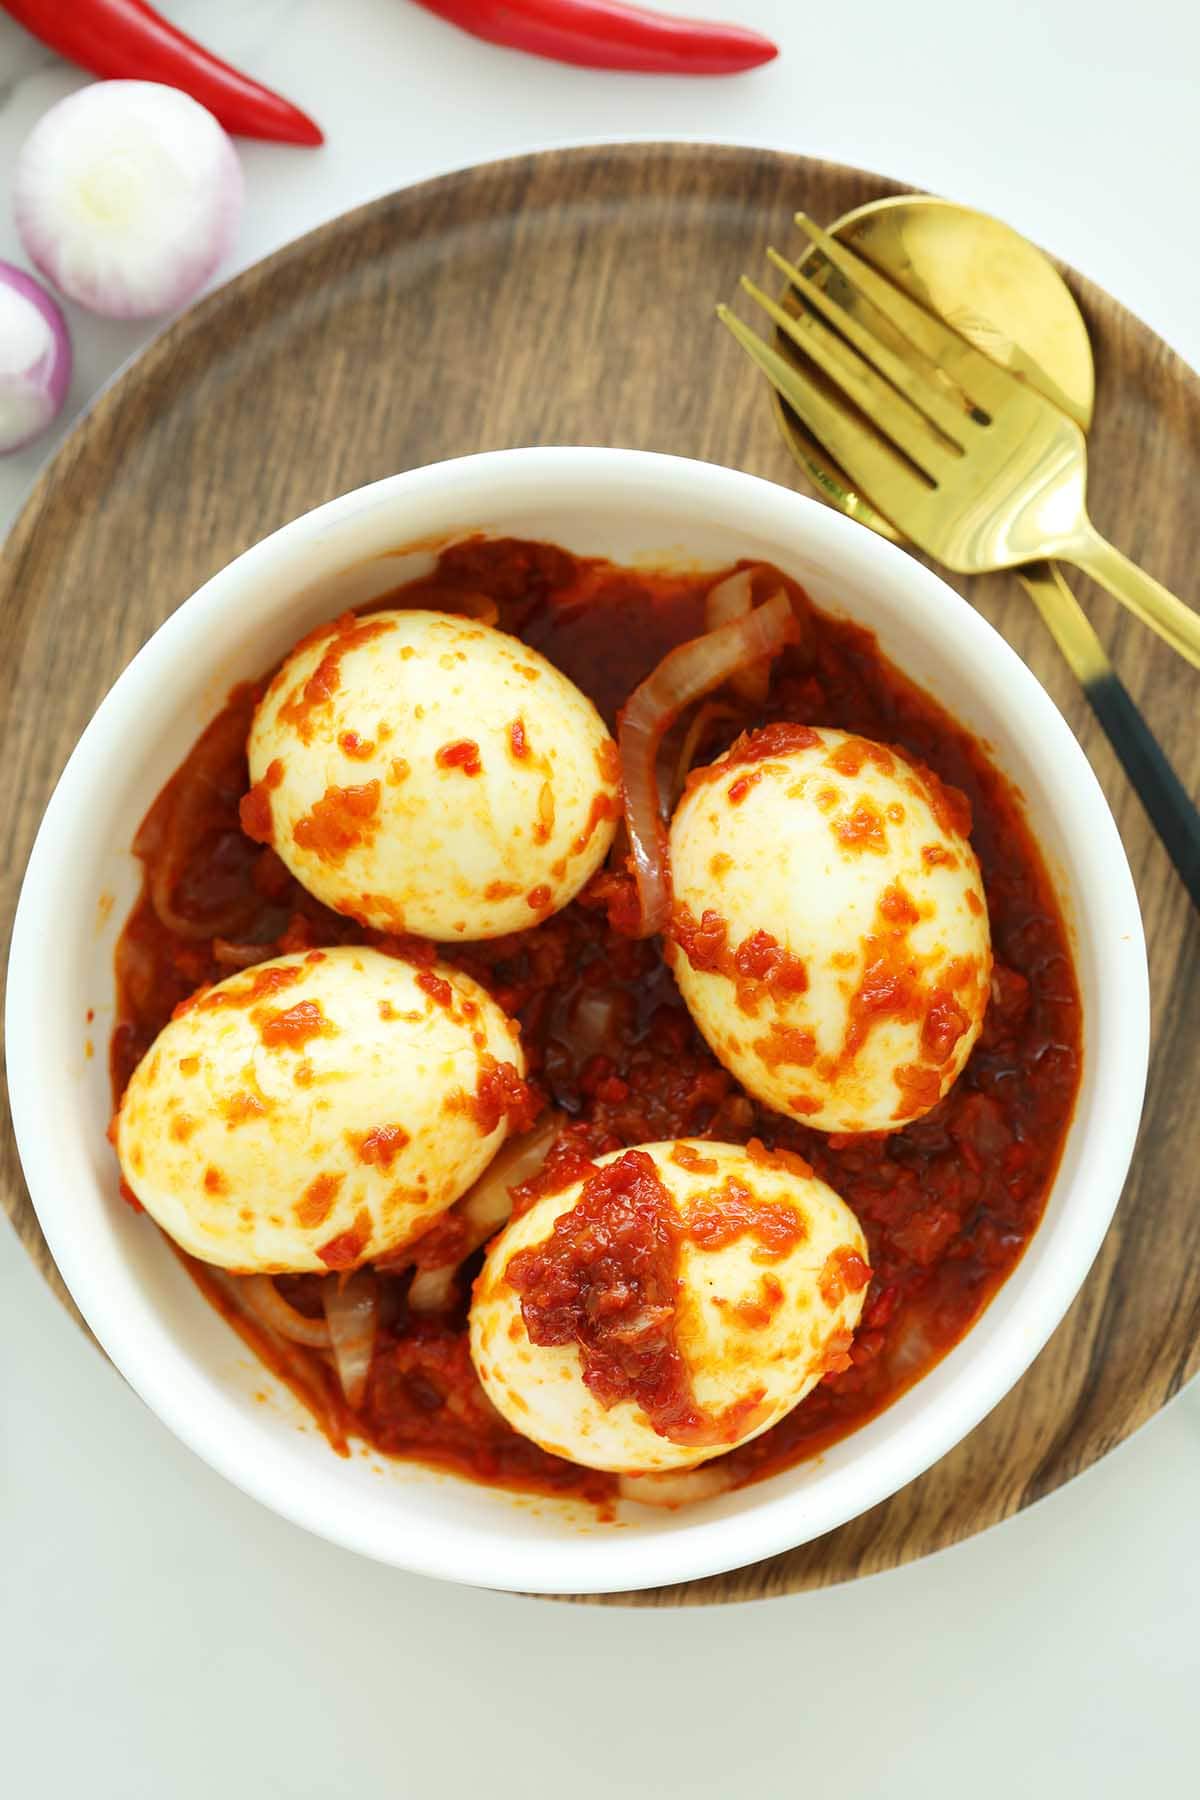 Delicious and Spicy Sambal Telur in a Bowl